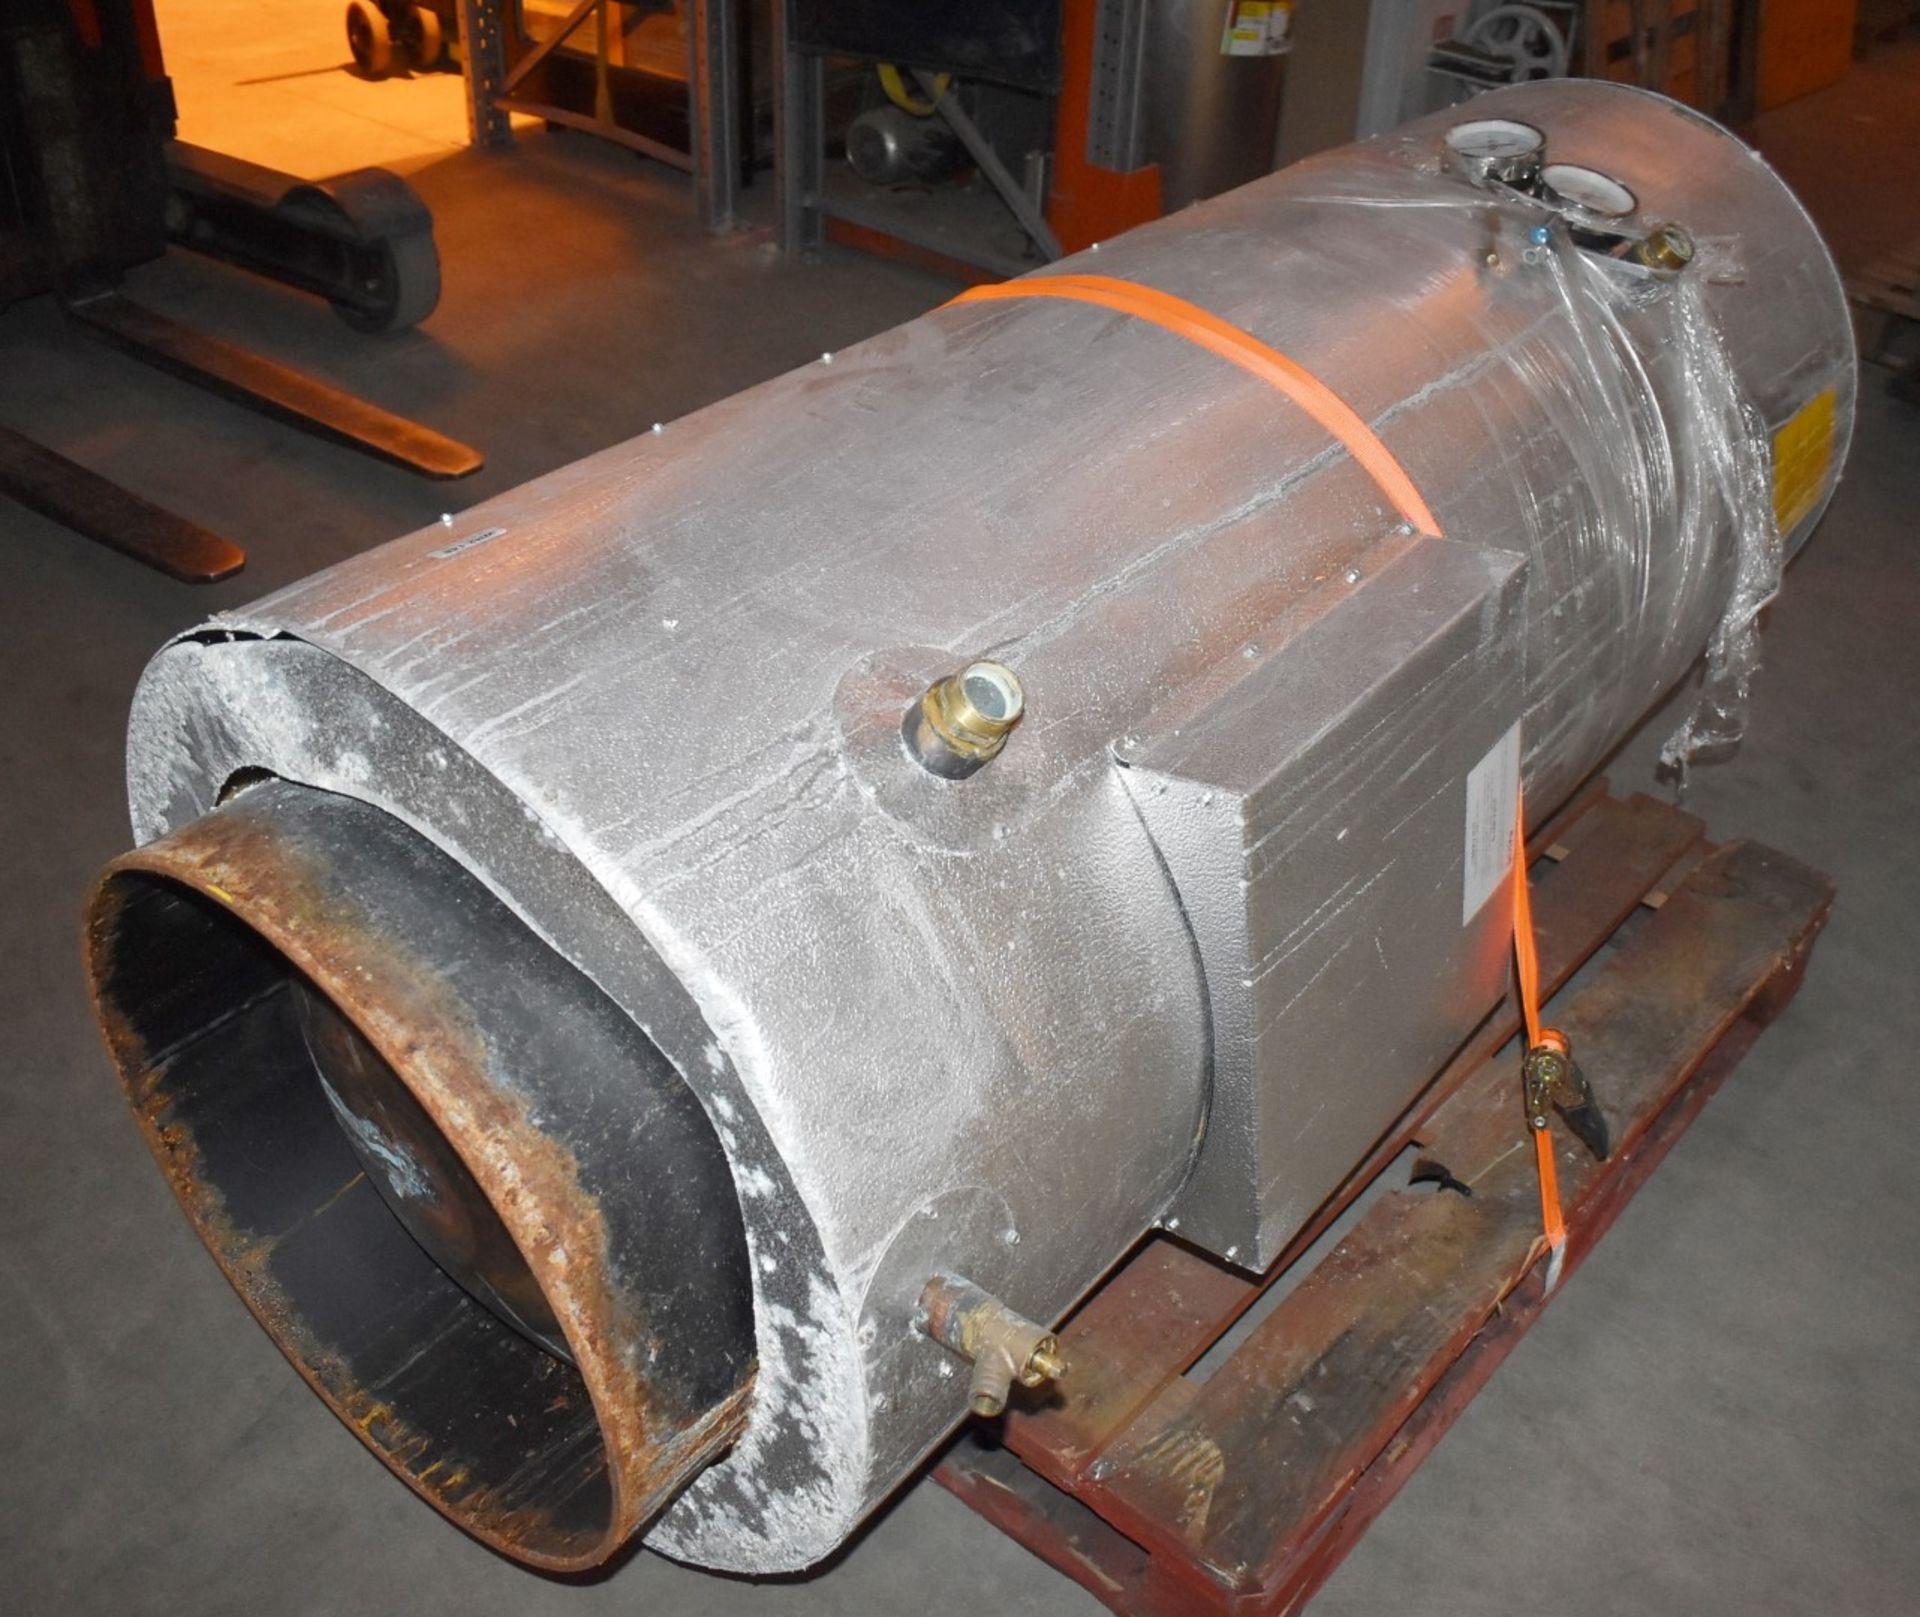 1 x Ryco SA 600 Tank - More Information to Follow - Ref: WH2-148B C6 - CL711 - Dimensions: Height - Image 12 of 14